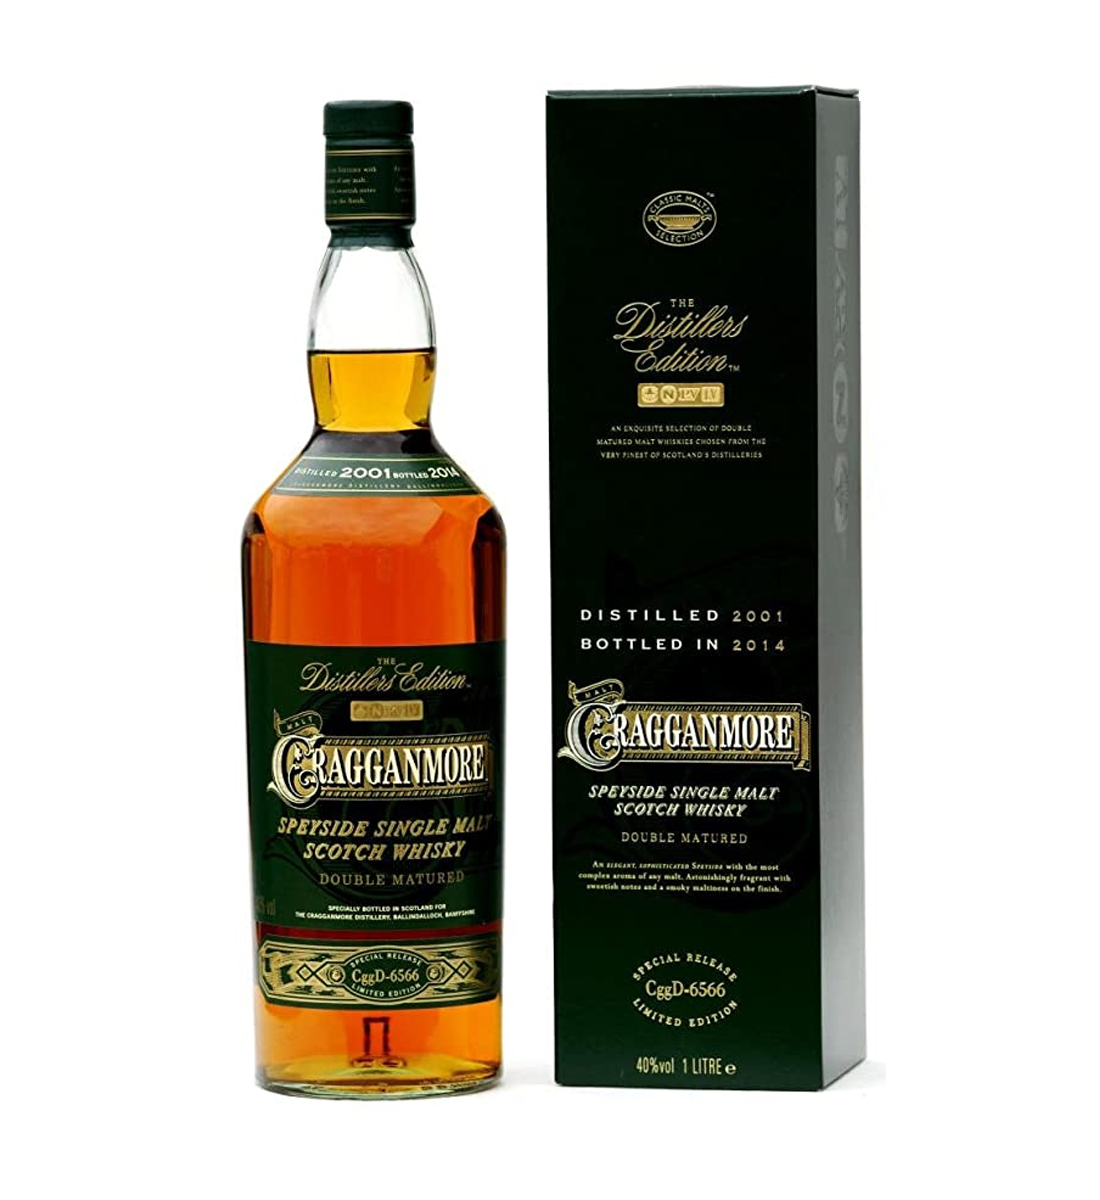 Whisky Cragganmore Distillers Edition 2001-2014 1L 2001-2014